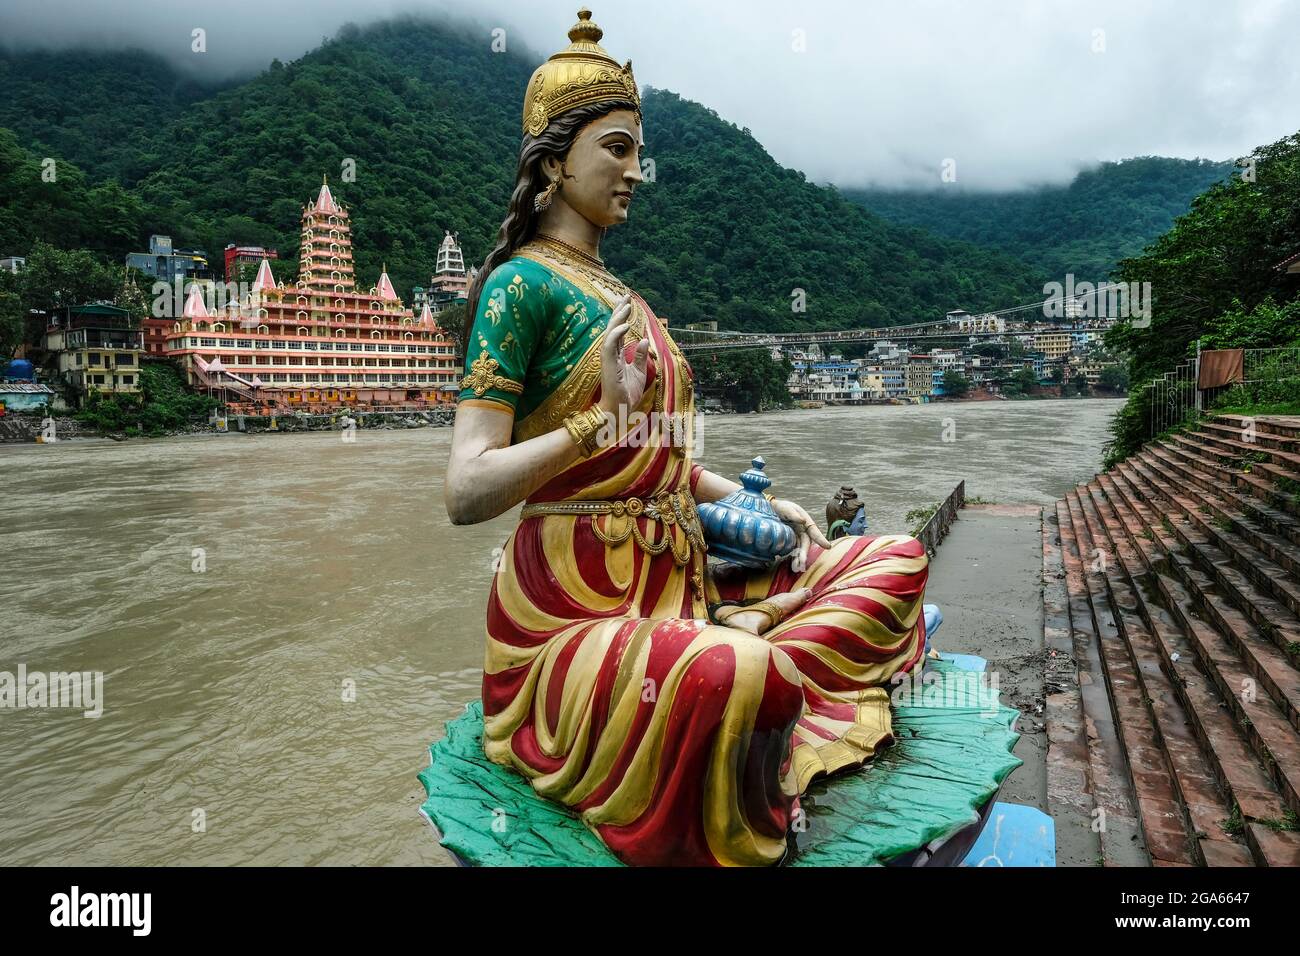 Rishikesh, India - July 2021: Views of the Swarg Niwas Temple from the Sai Ghat in Rishikesh on July 20, 2021 in Uttarakhand, India. Stock Photo